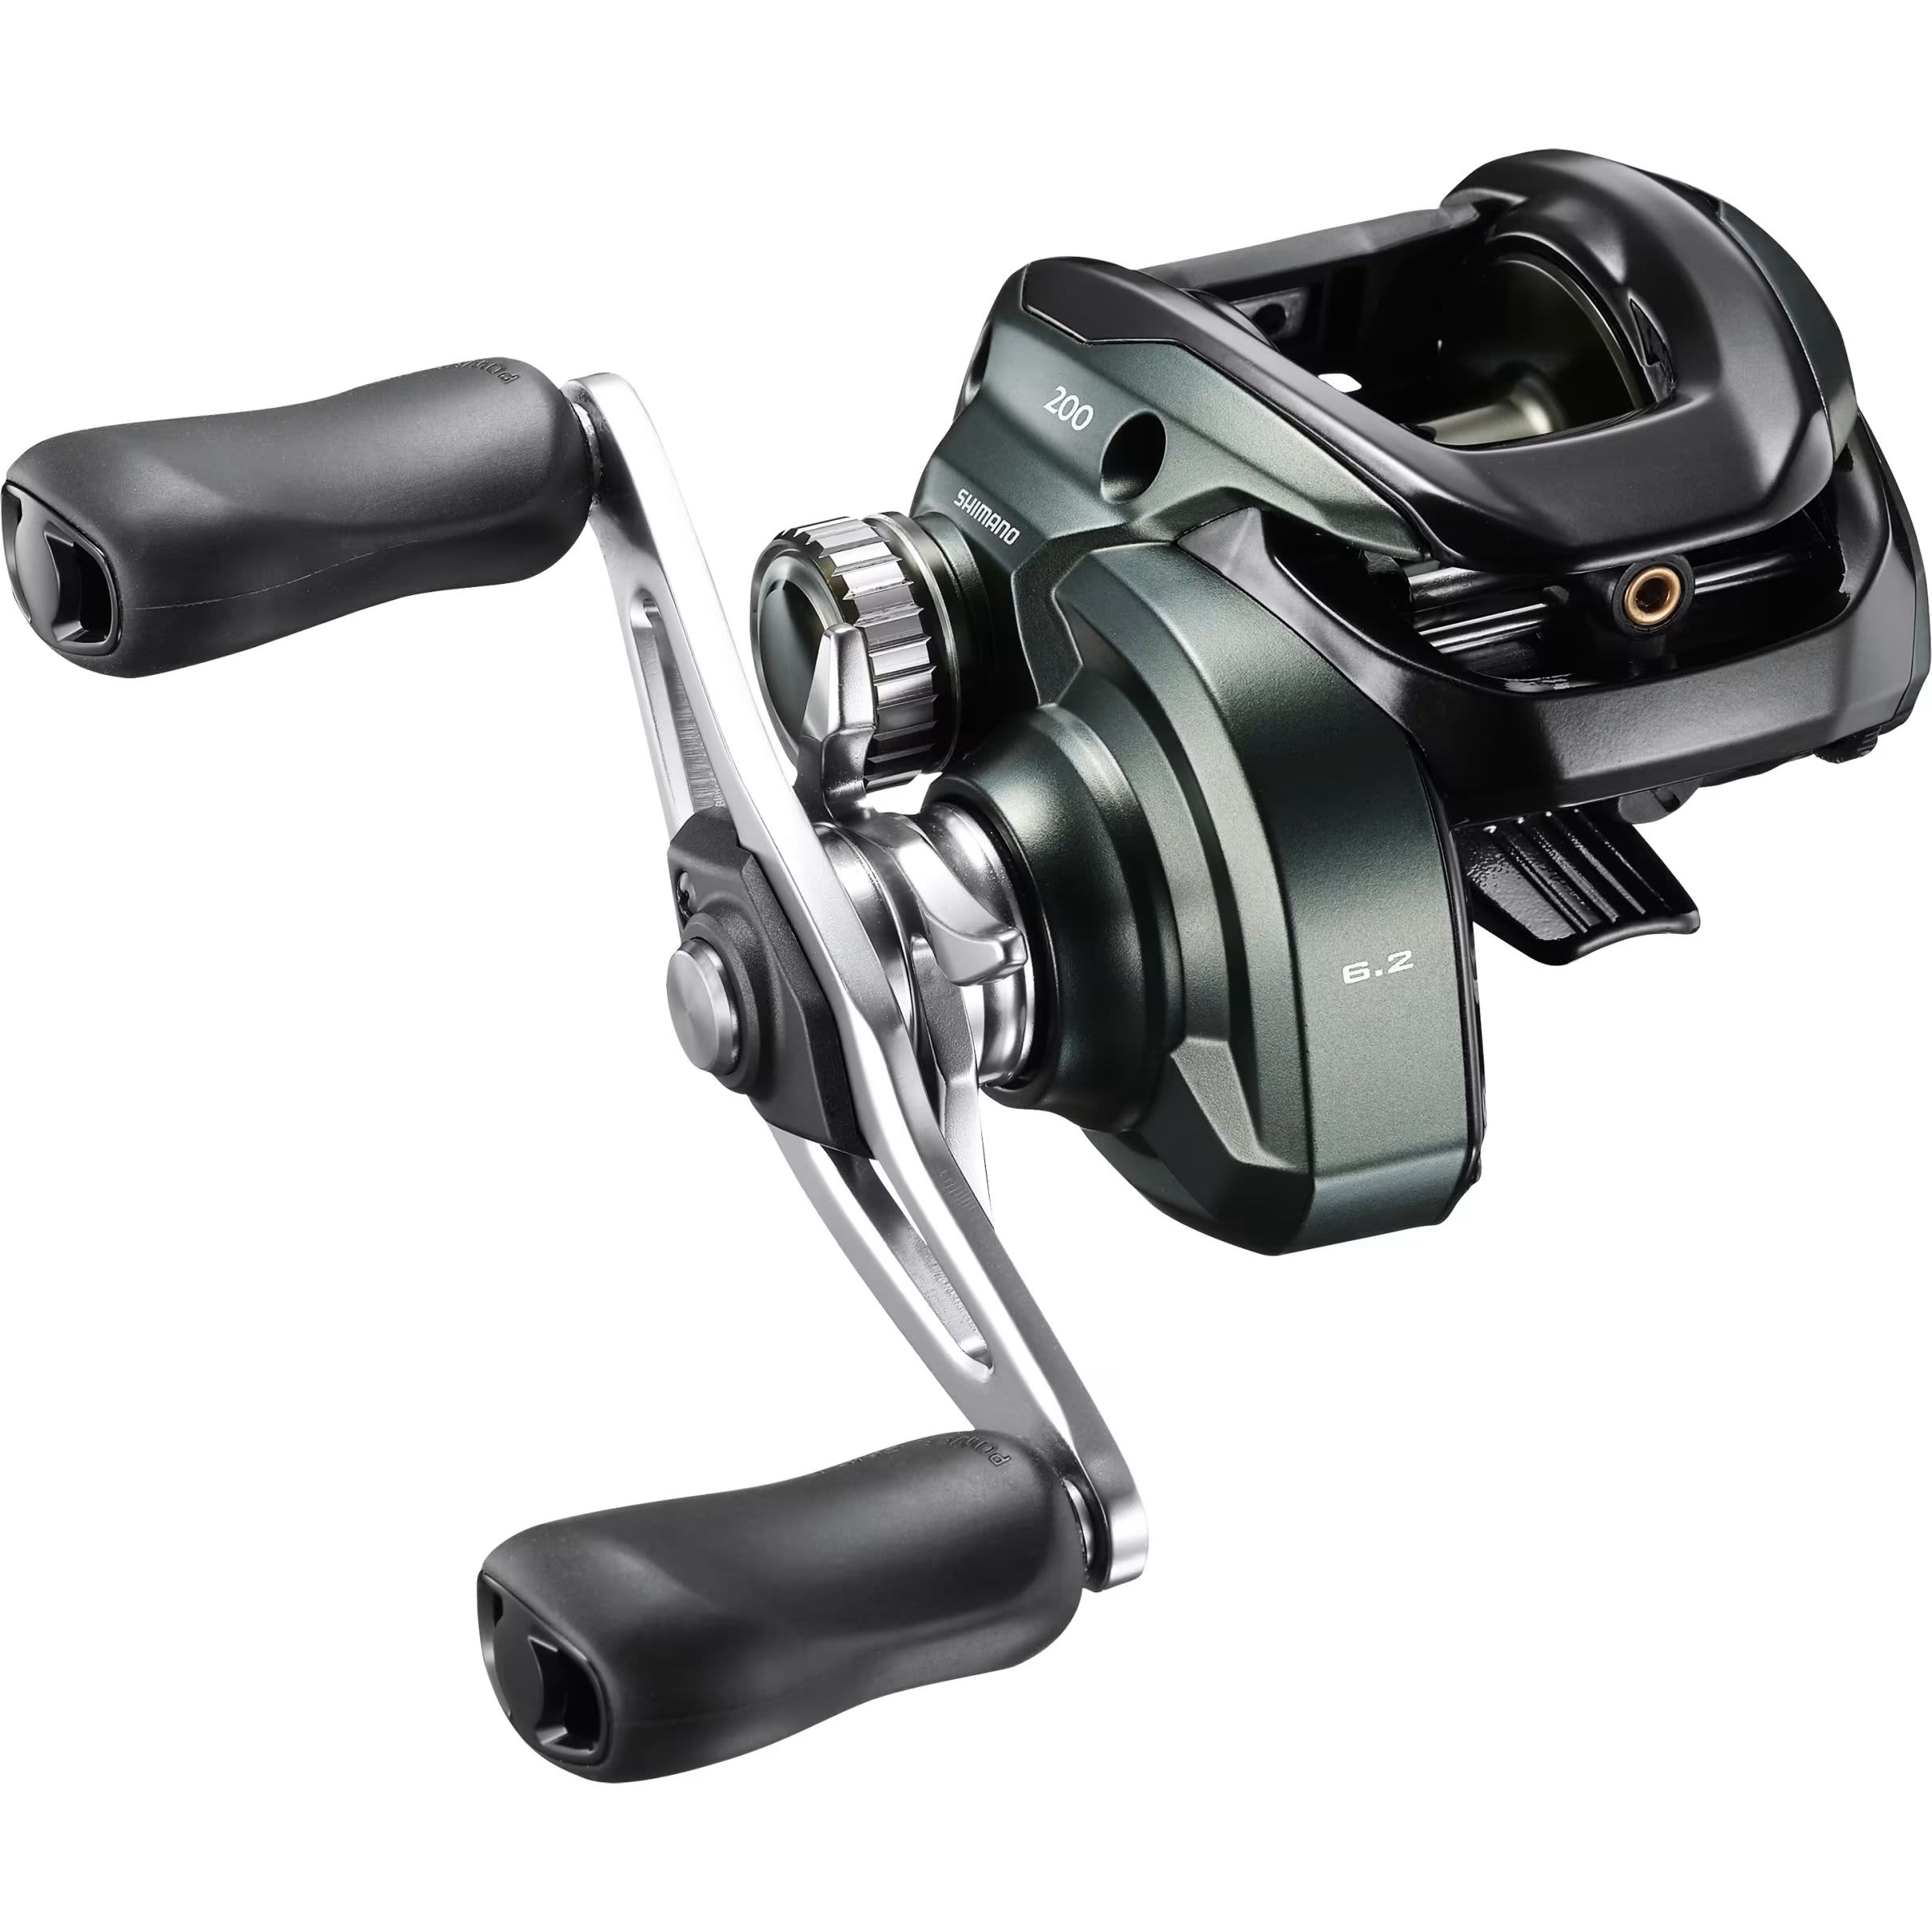 Shimano Curado MGL 150 First Impression - Fishing Rods, Reels, Line, and  Knots - Bass Fishing Forums